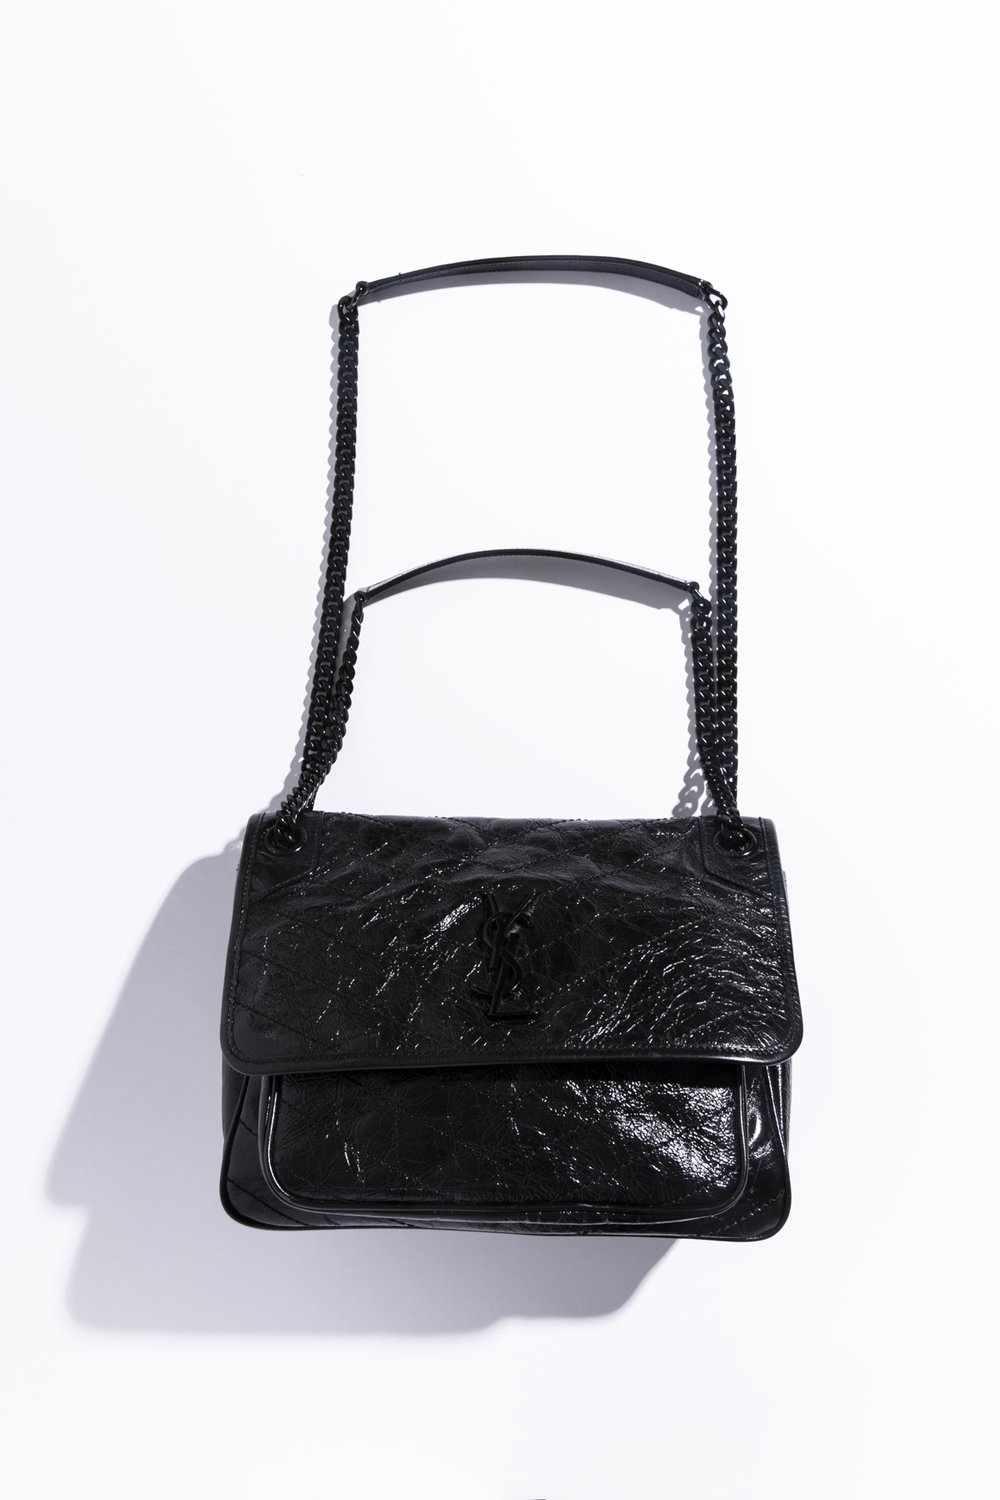 LOUIS VUITTON Slick Black Patent Leather Square Toe Cut Out Buckle Vam –  theREMODA